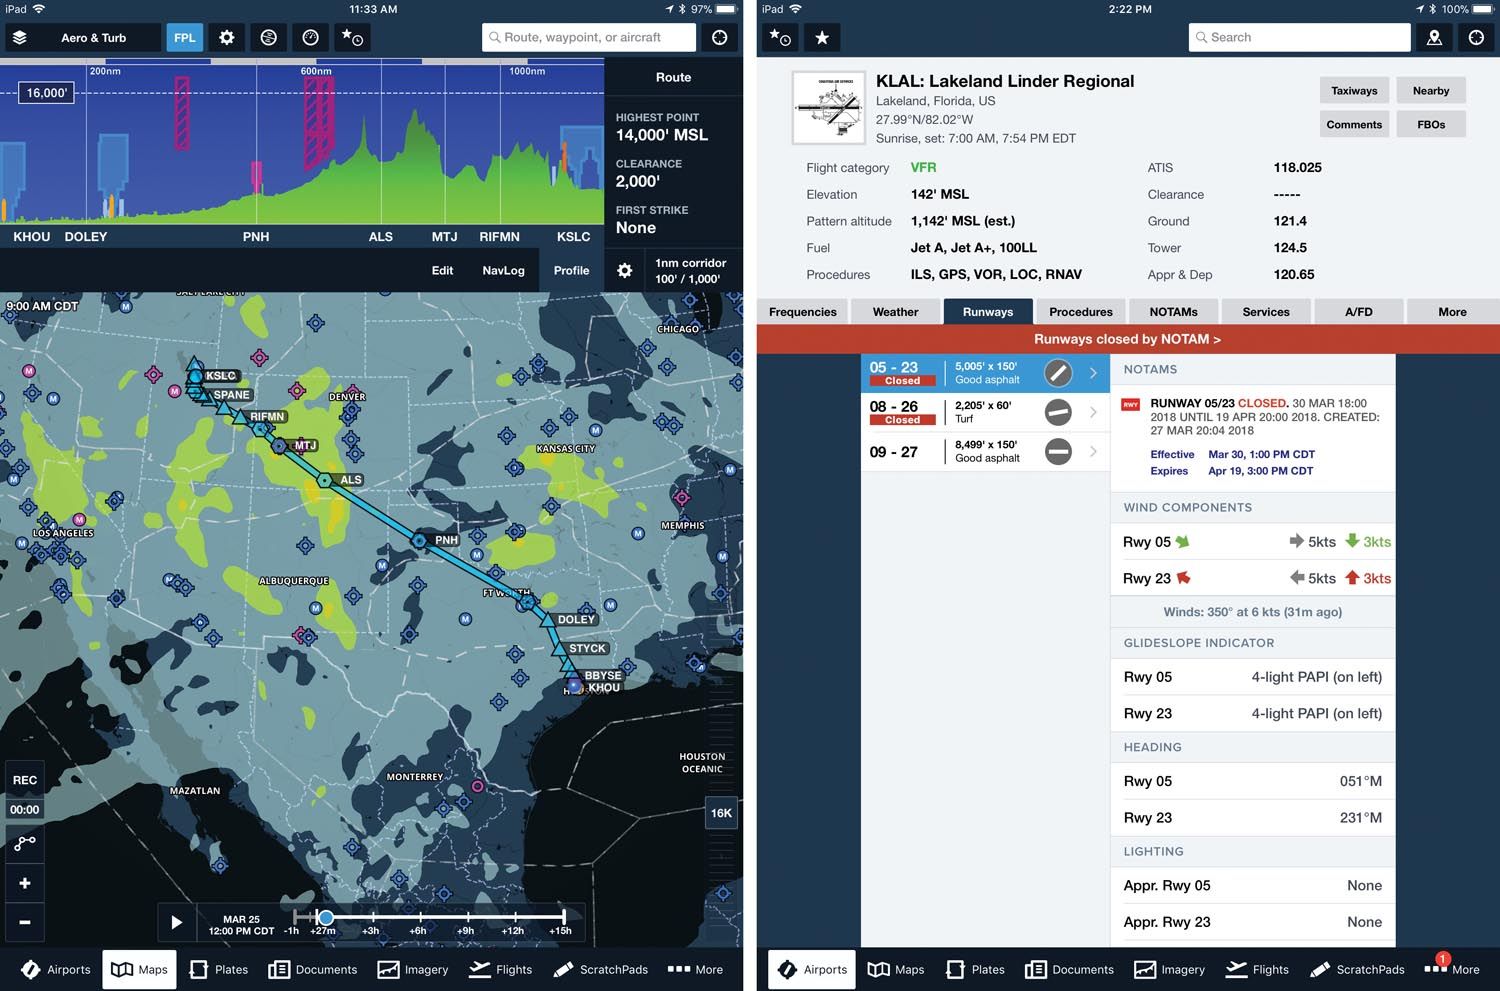 (Left) ForeFlight flight planning with turbulence layer. (Right) ForeFlight airport view for Lakeland, Florida, with runway closure warning.